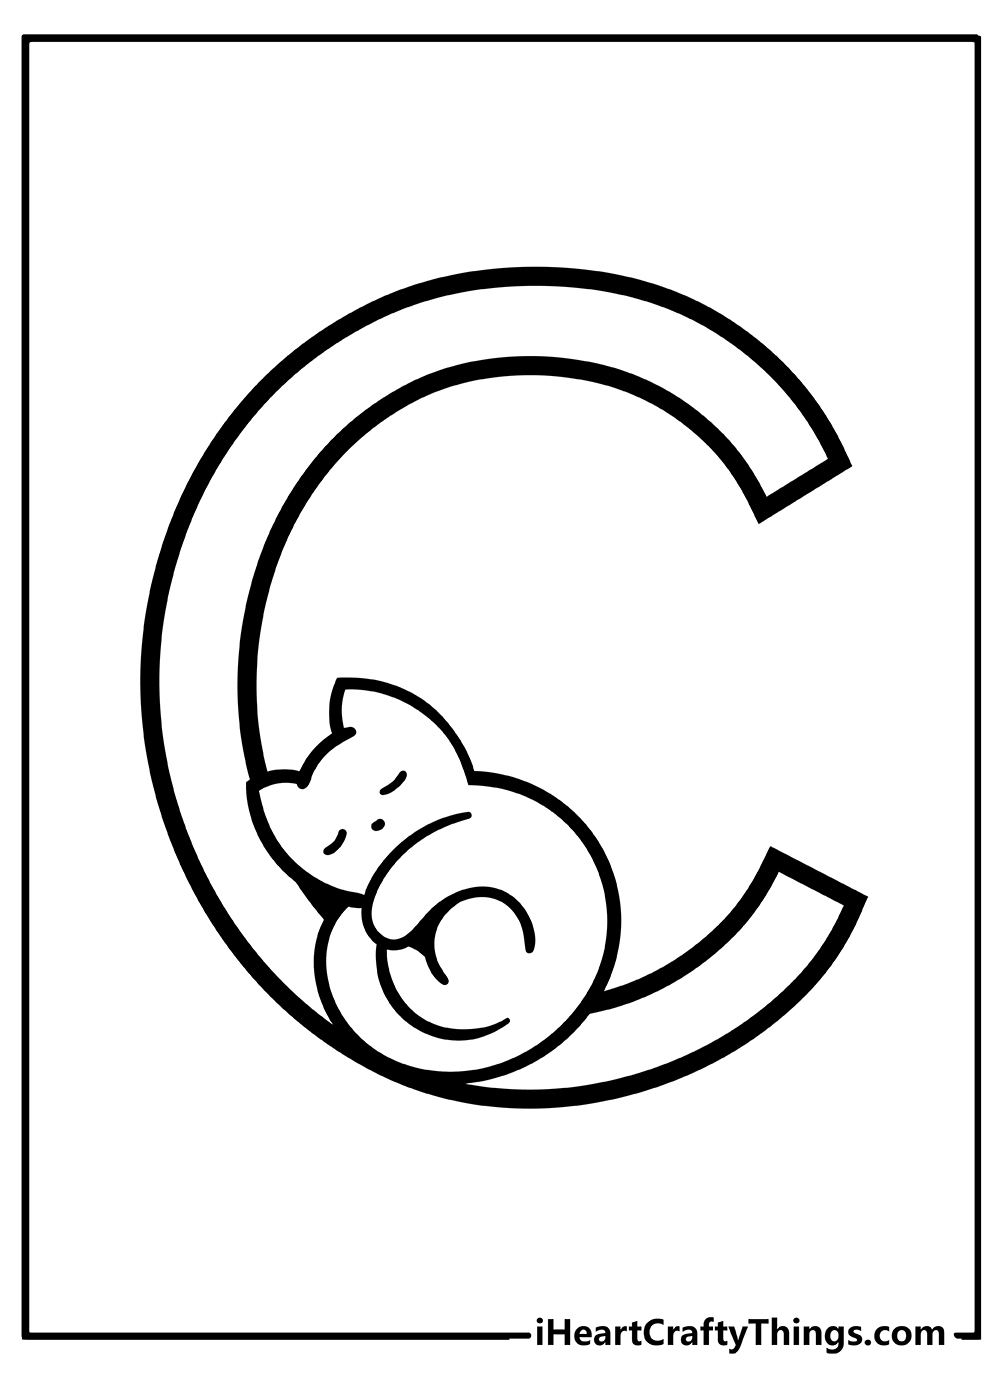 Letter C Coloring Pages free pdf download